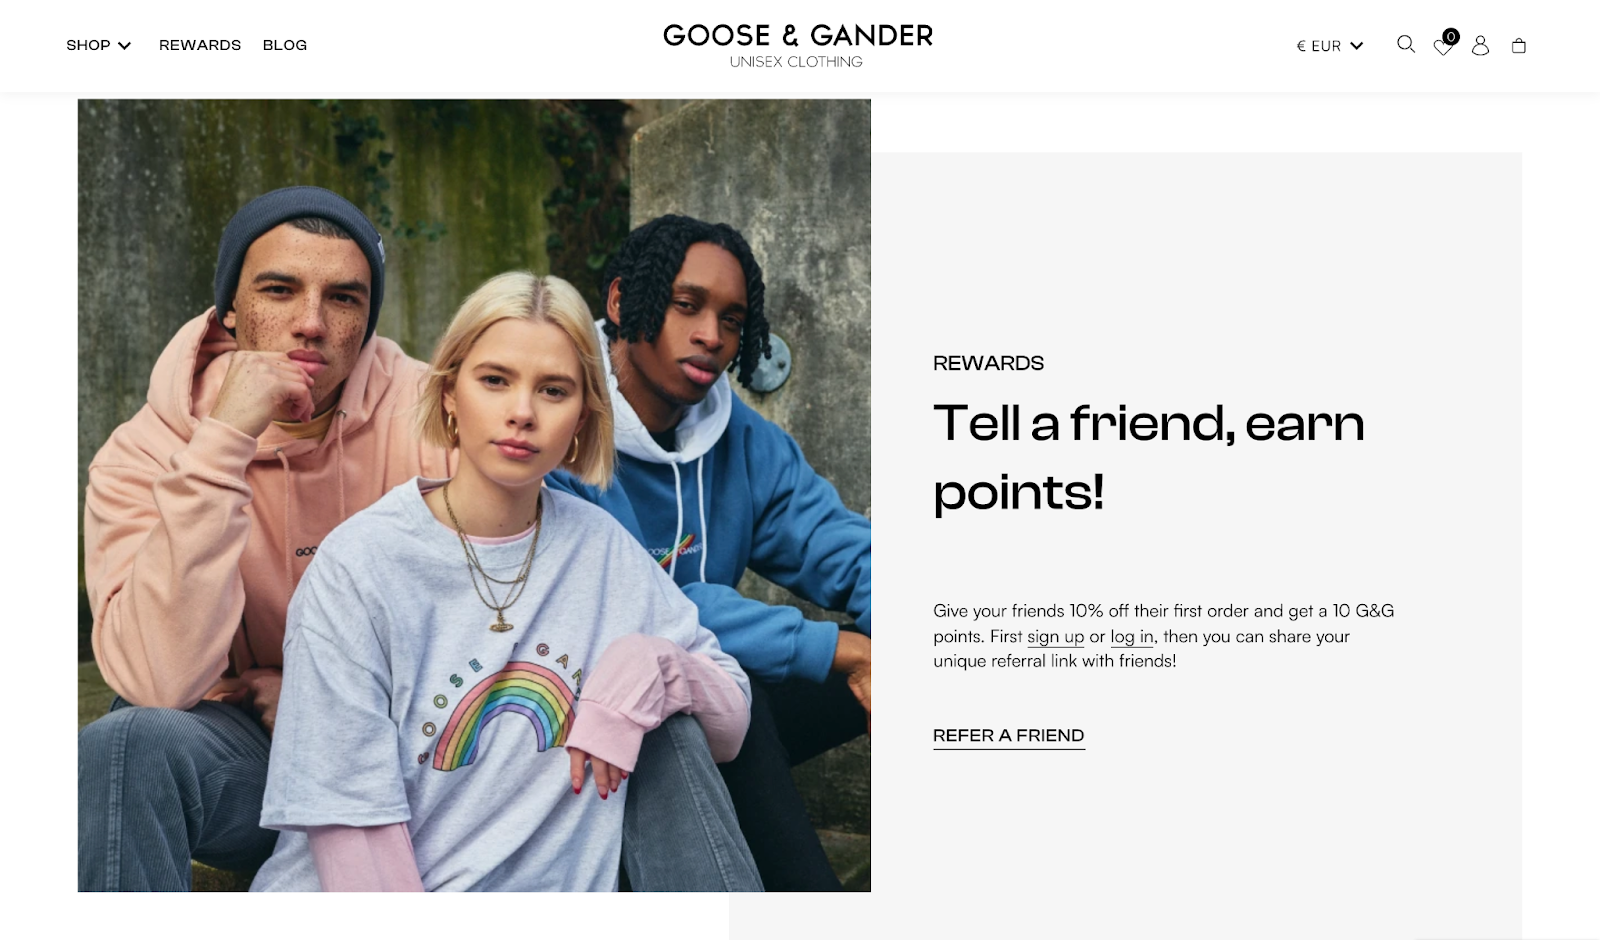 Ecommerce loyalty explainer page–A screenshot from Goose & Gander’s rewards explainer page with an image on the left of 3 people sitting down wearing Goose & Gander clothing and text on the right reading “Tell a friend, earn points!”